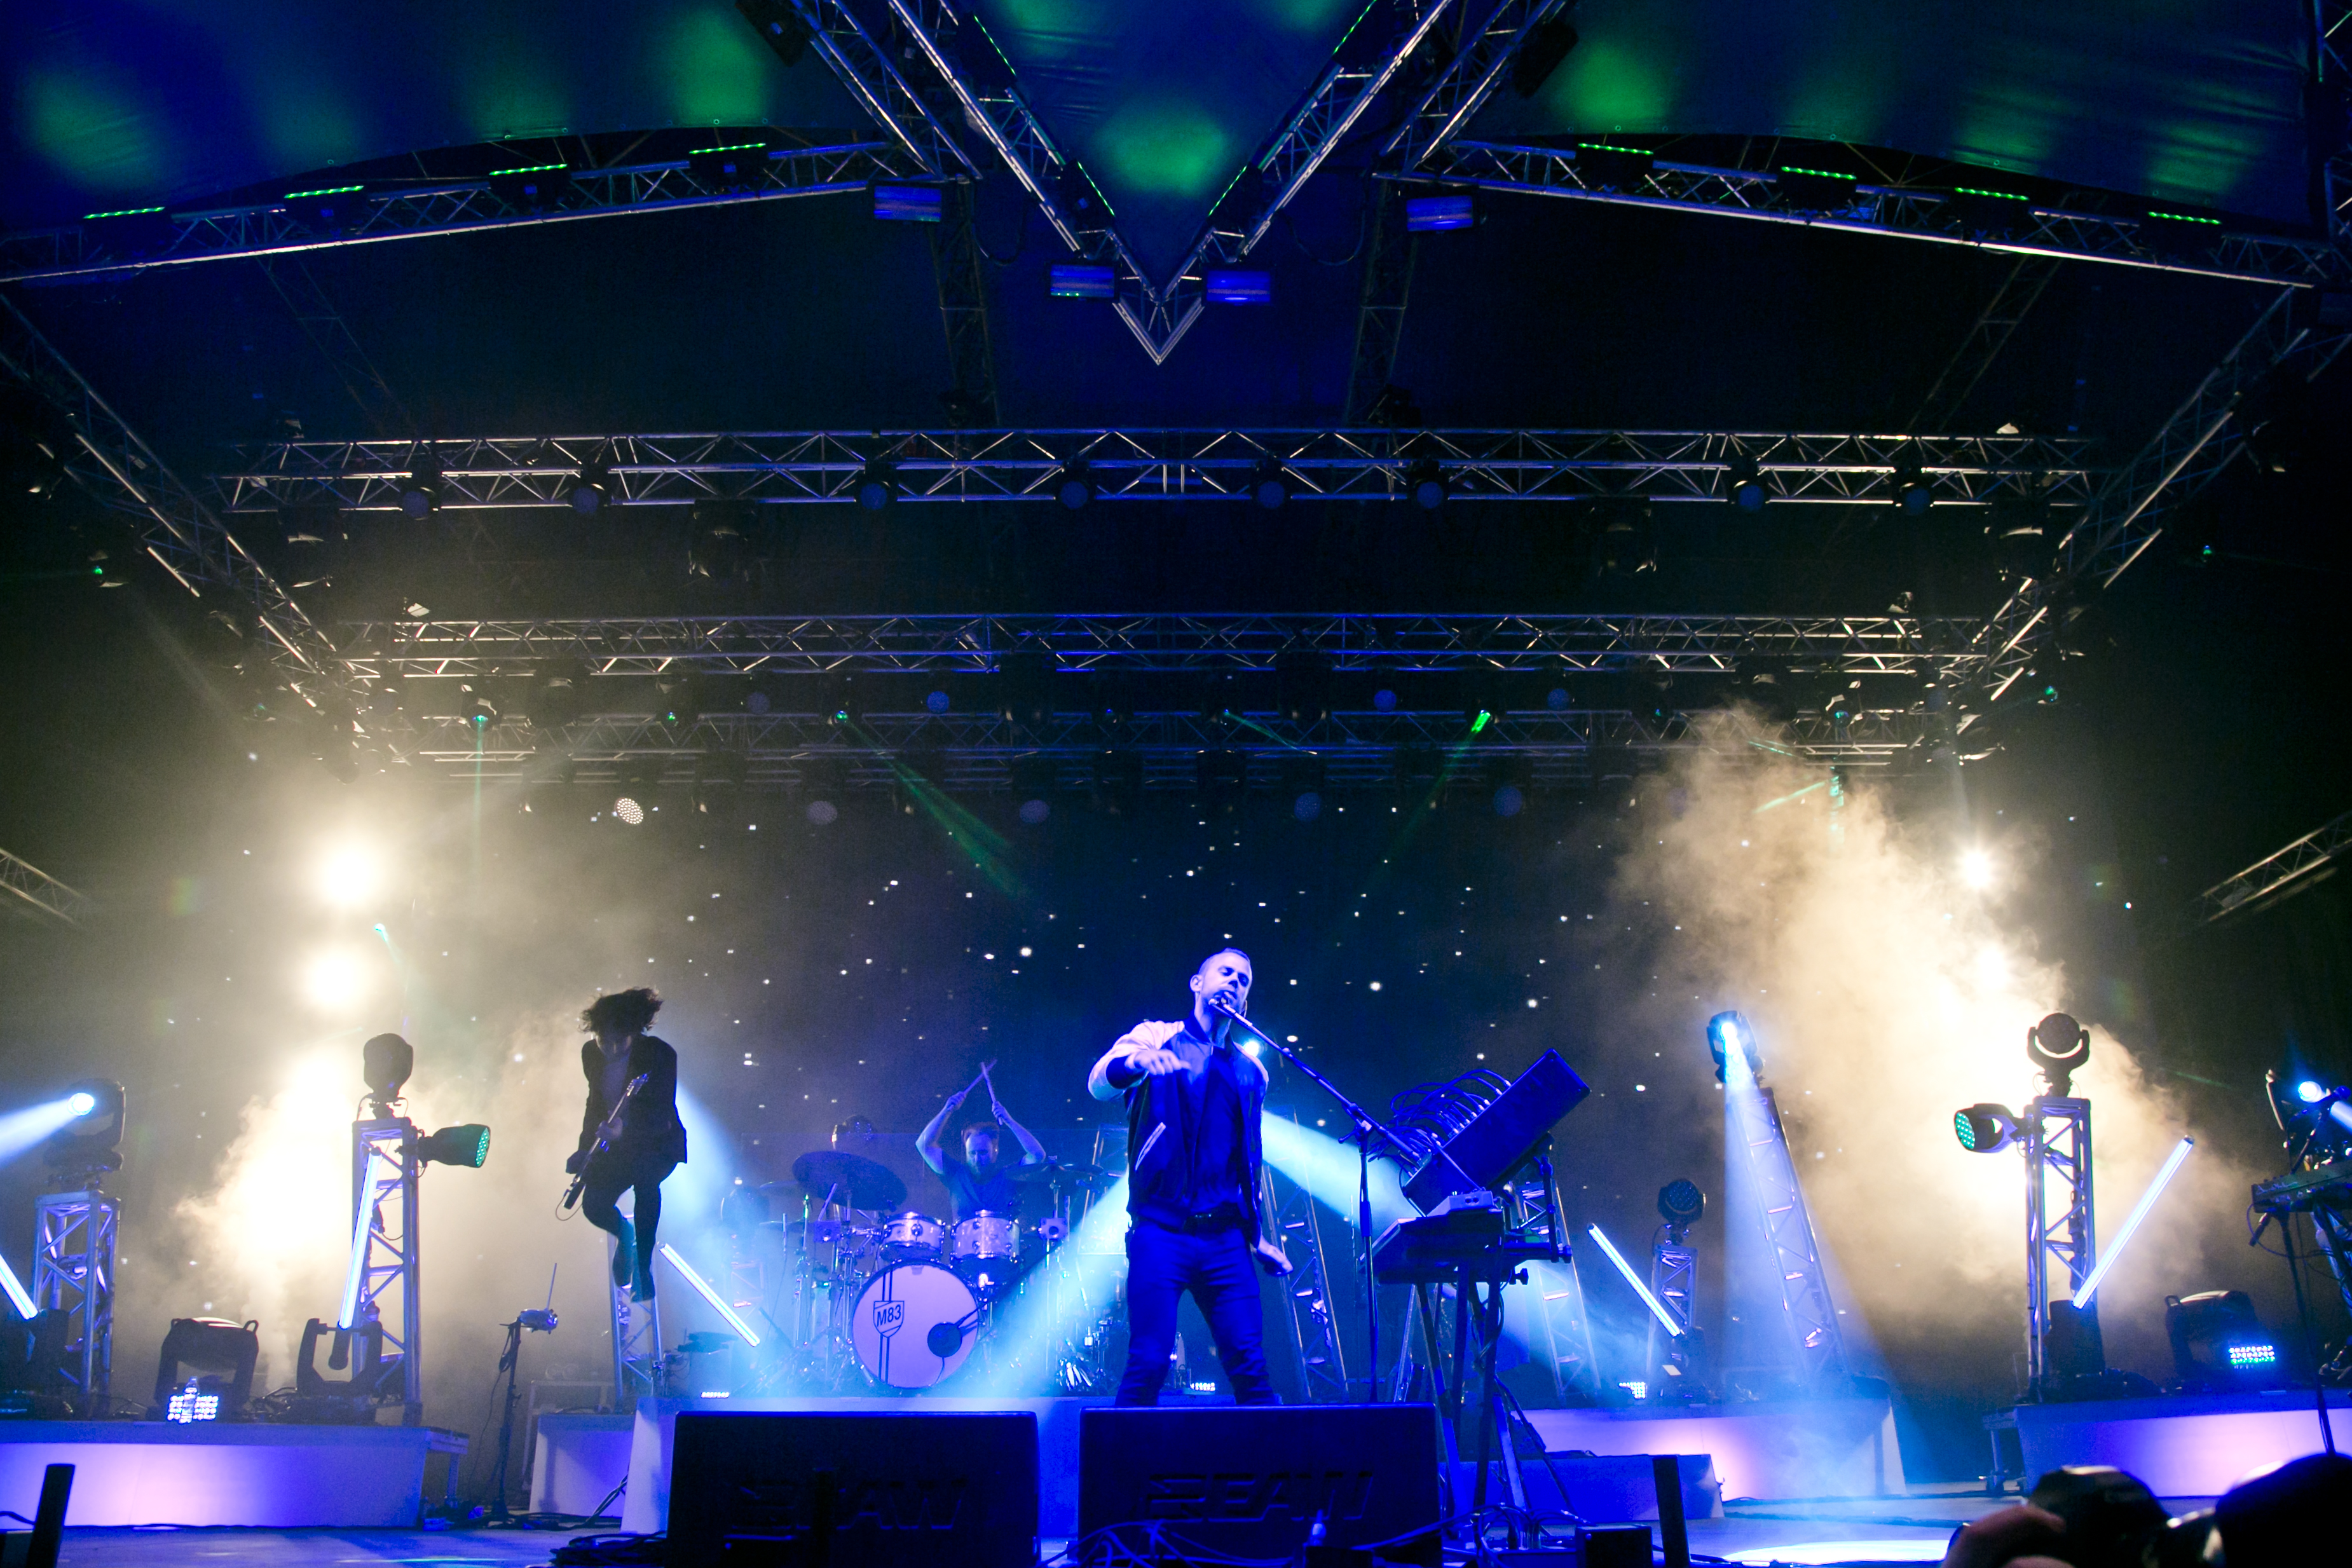 M83 at Sziget Festival, Budapest, Hungary - 15 August 2016